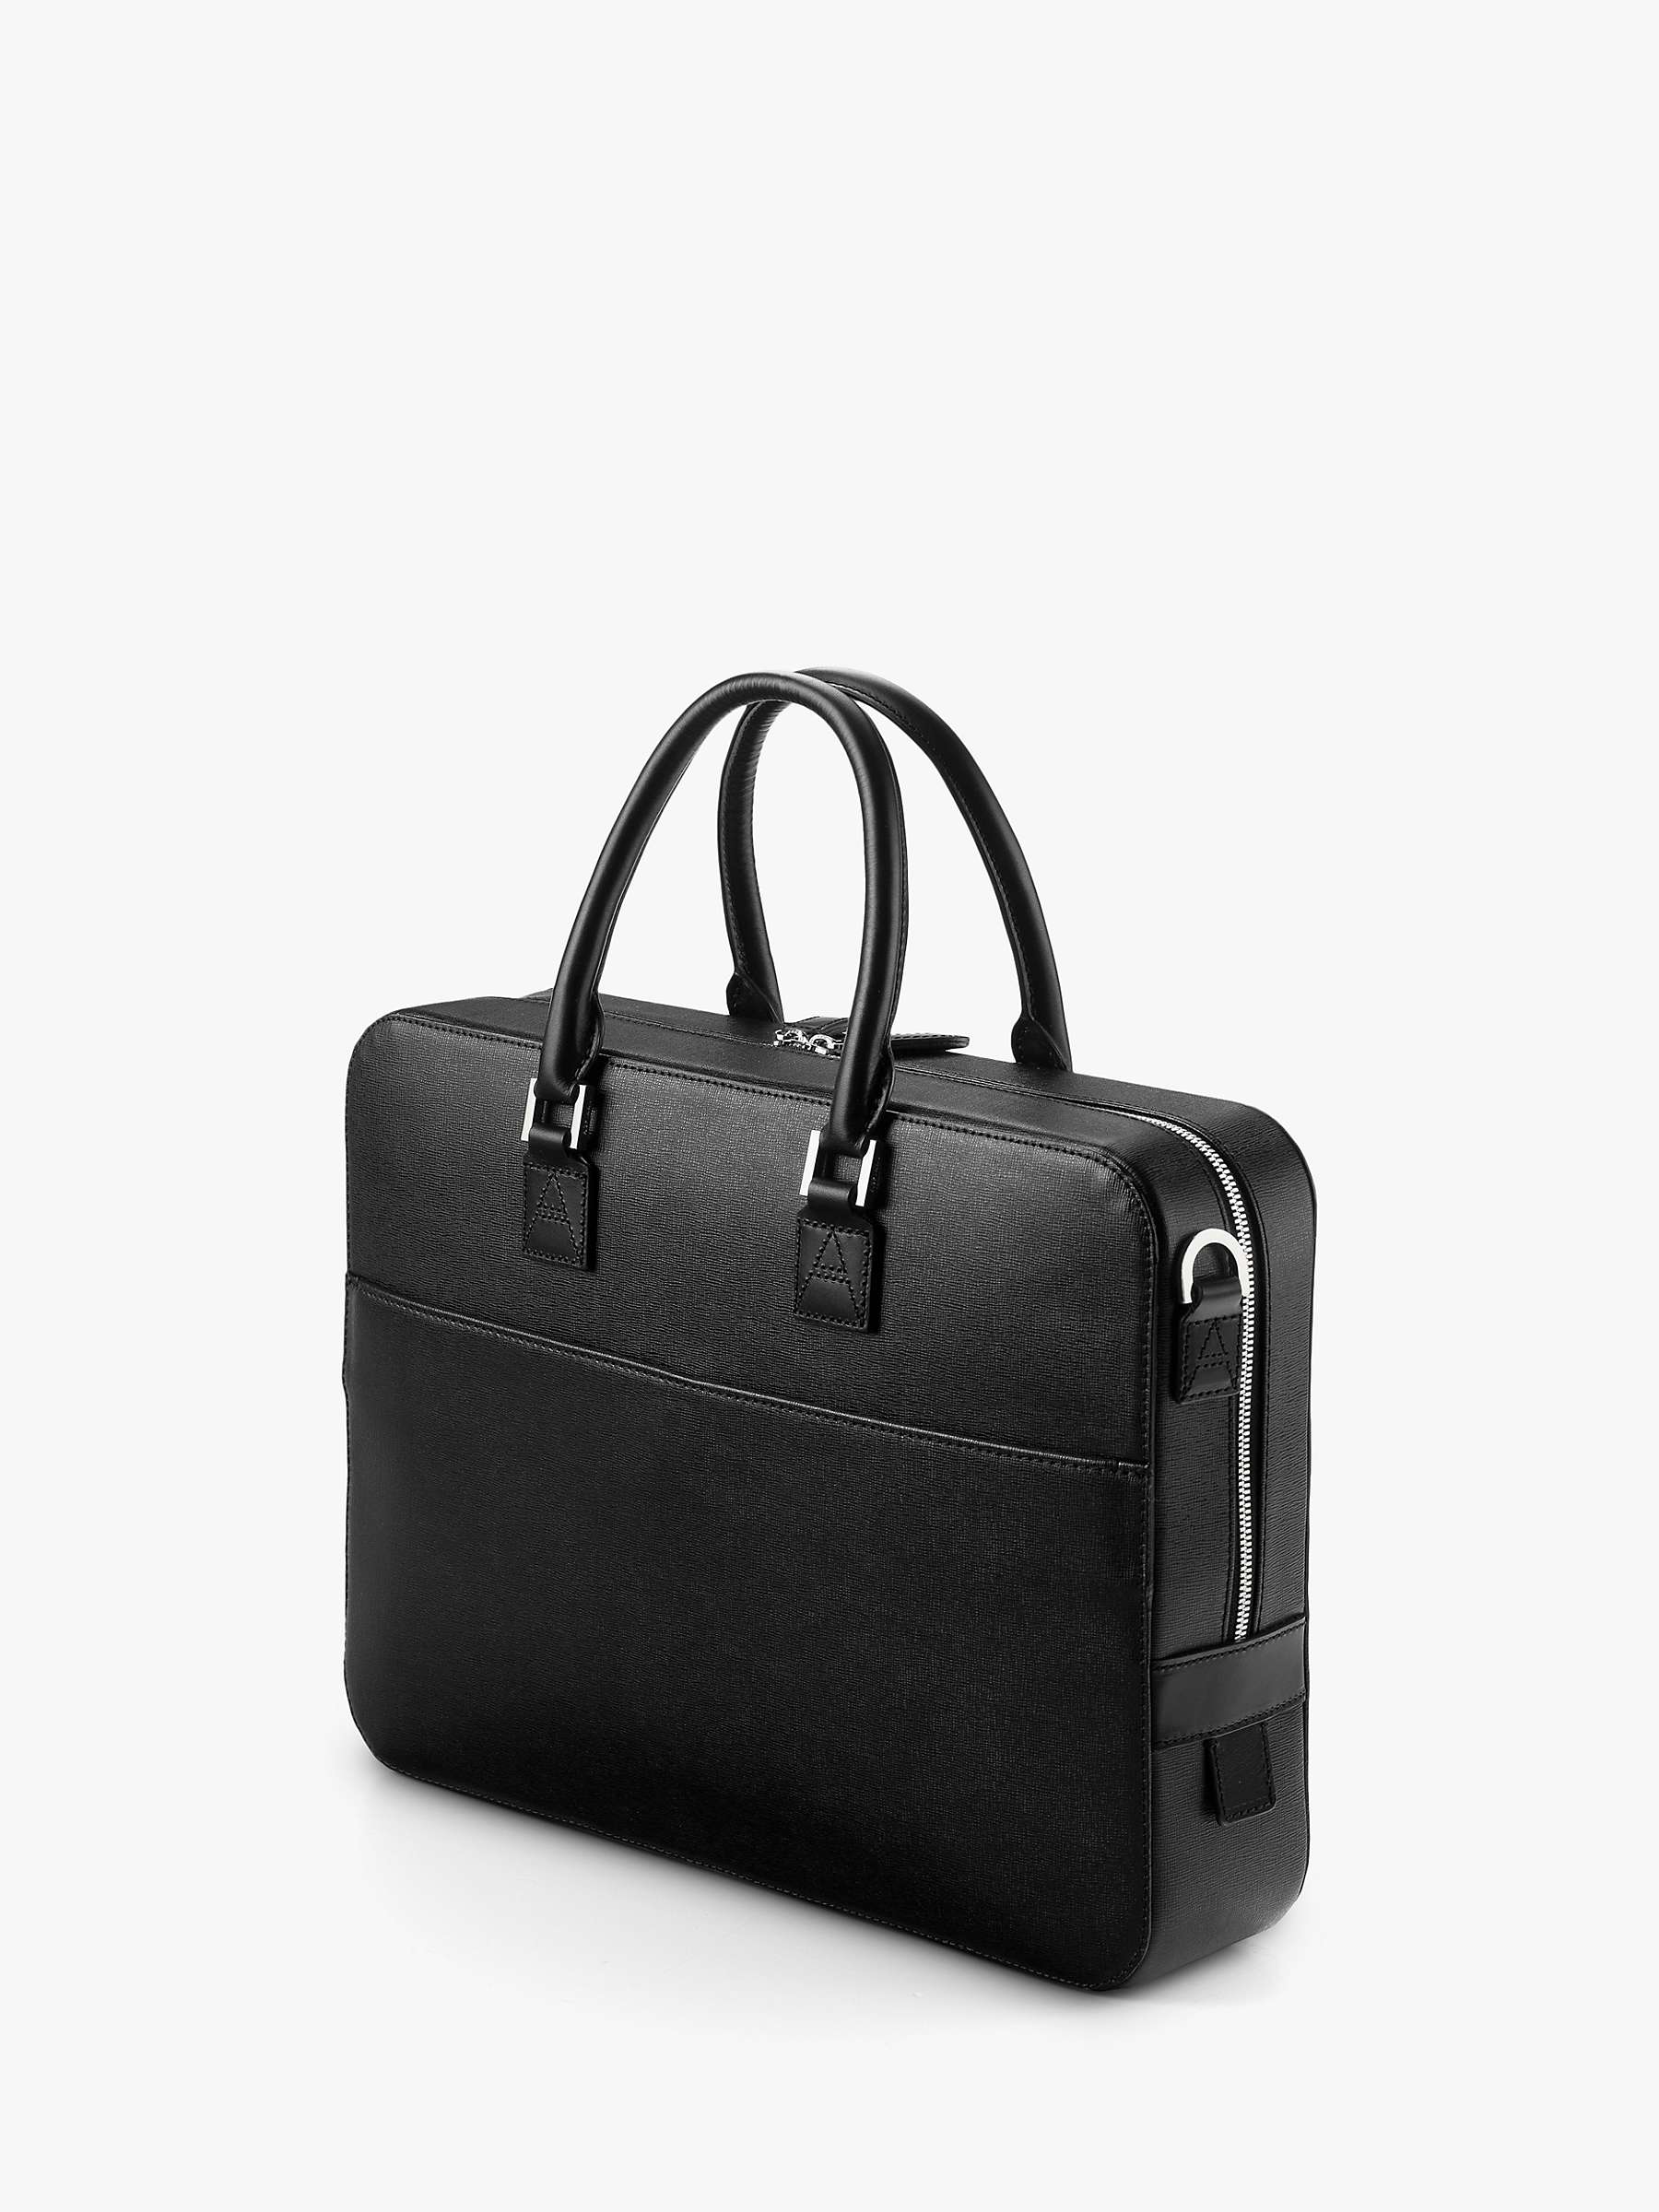 Buy Aspinal of London Mount Street Small Saffiano Leather Laptop Bag Online at johnlewis.com